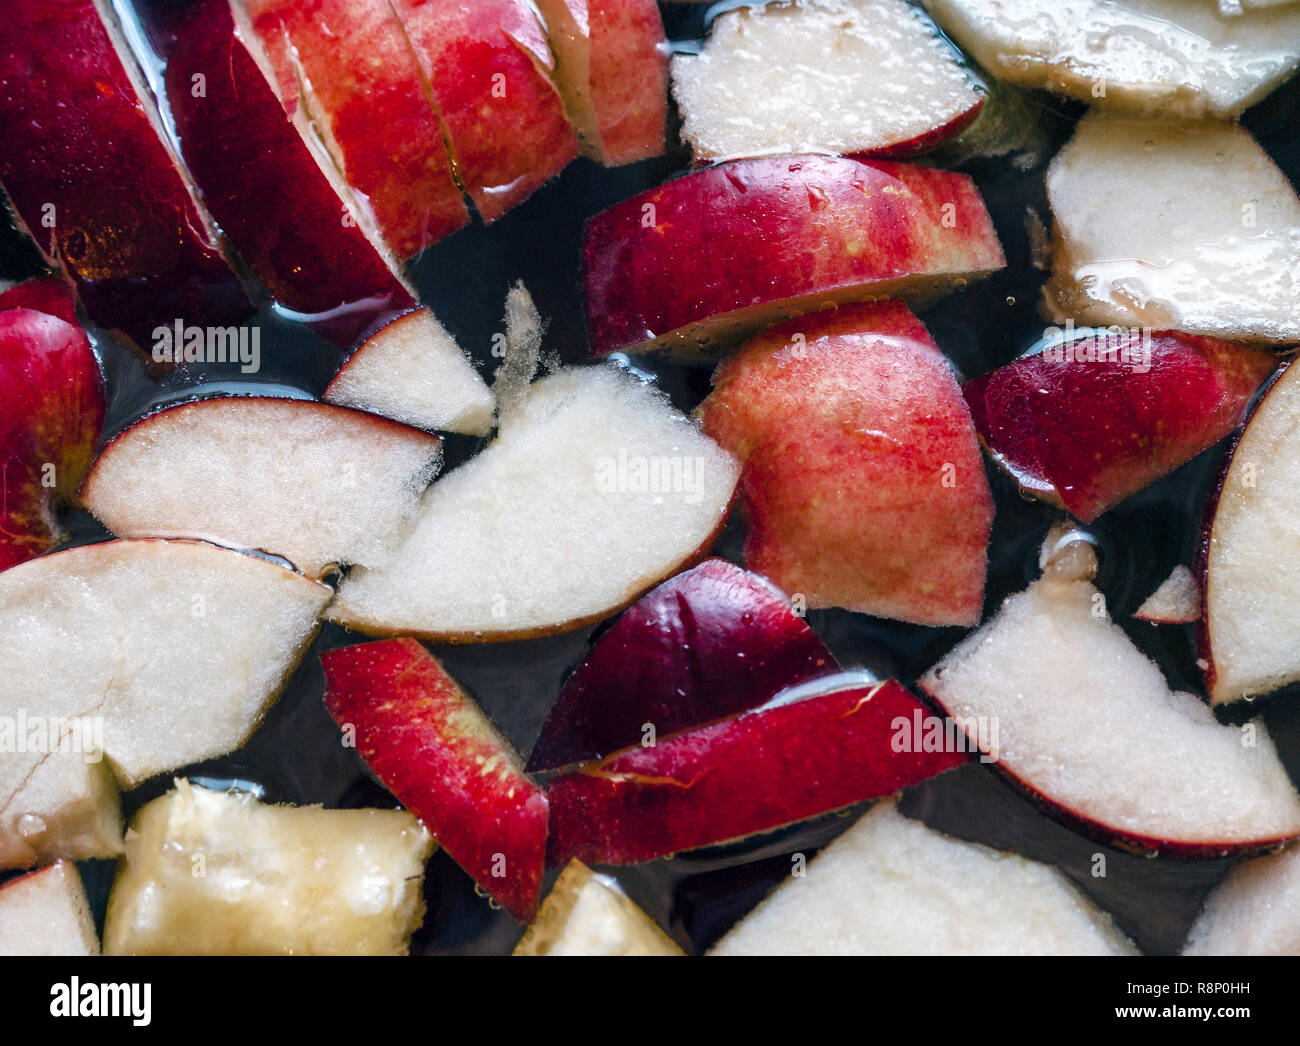 Colorful Apple Slices, Mixed Fruits In A Pot.  Refreshing Fruit Apple Cider Punch Party Drink. Organic Food And Beverage Background. Stock Photo